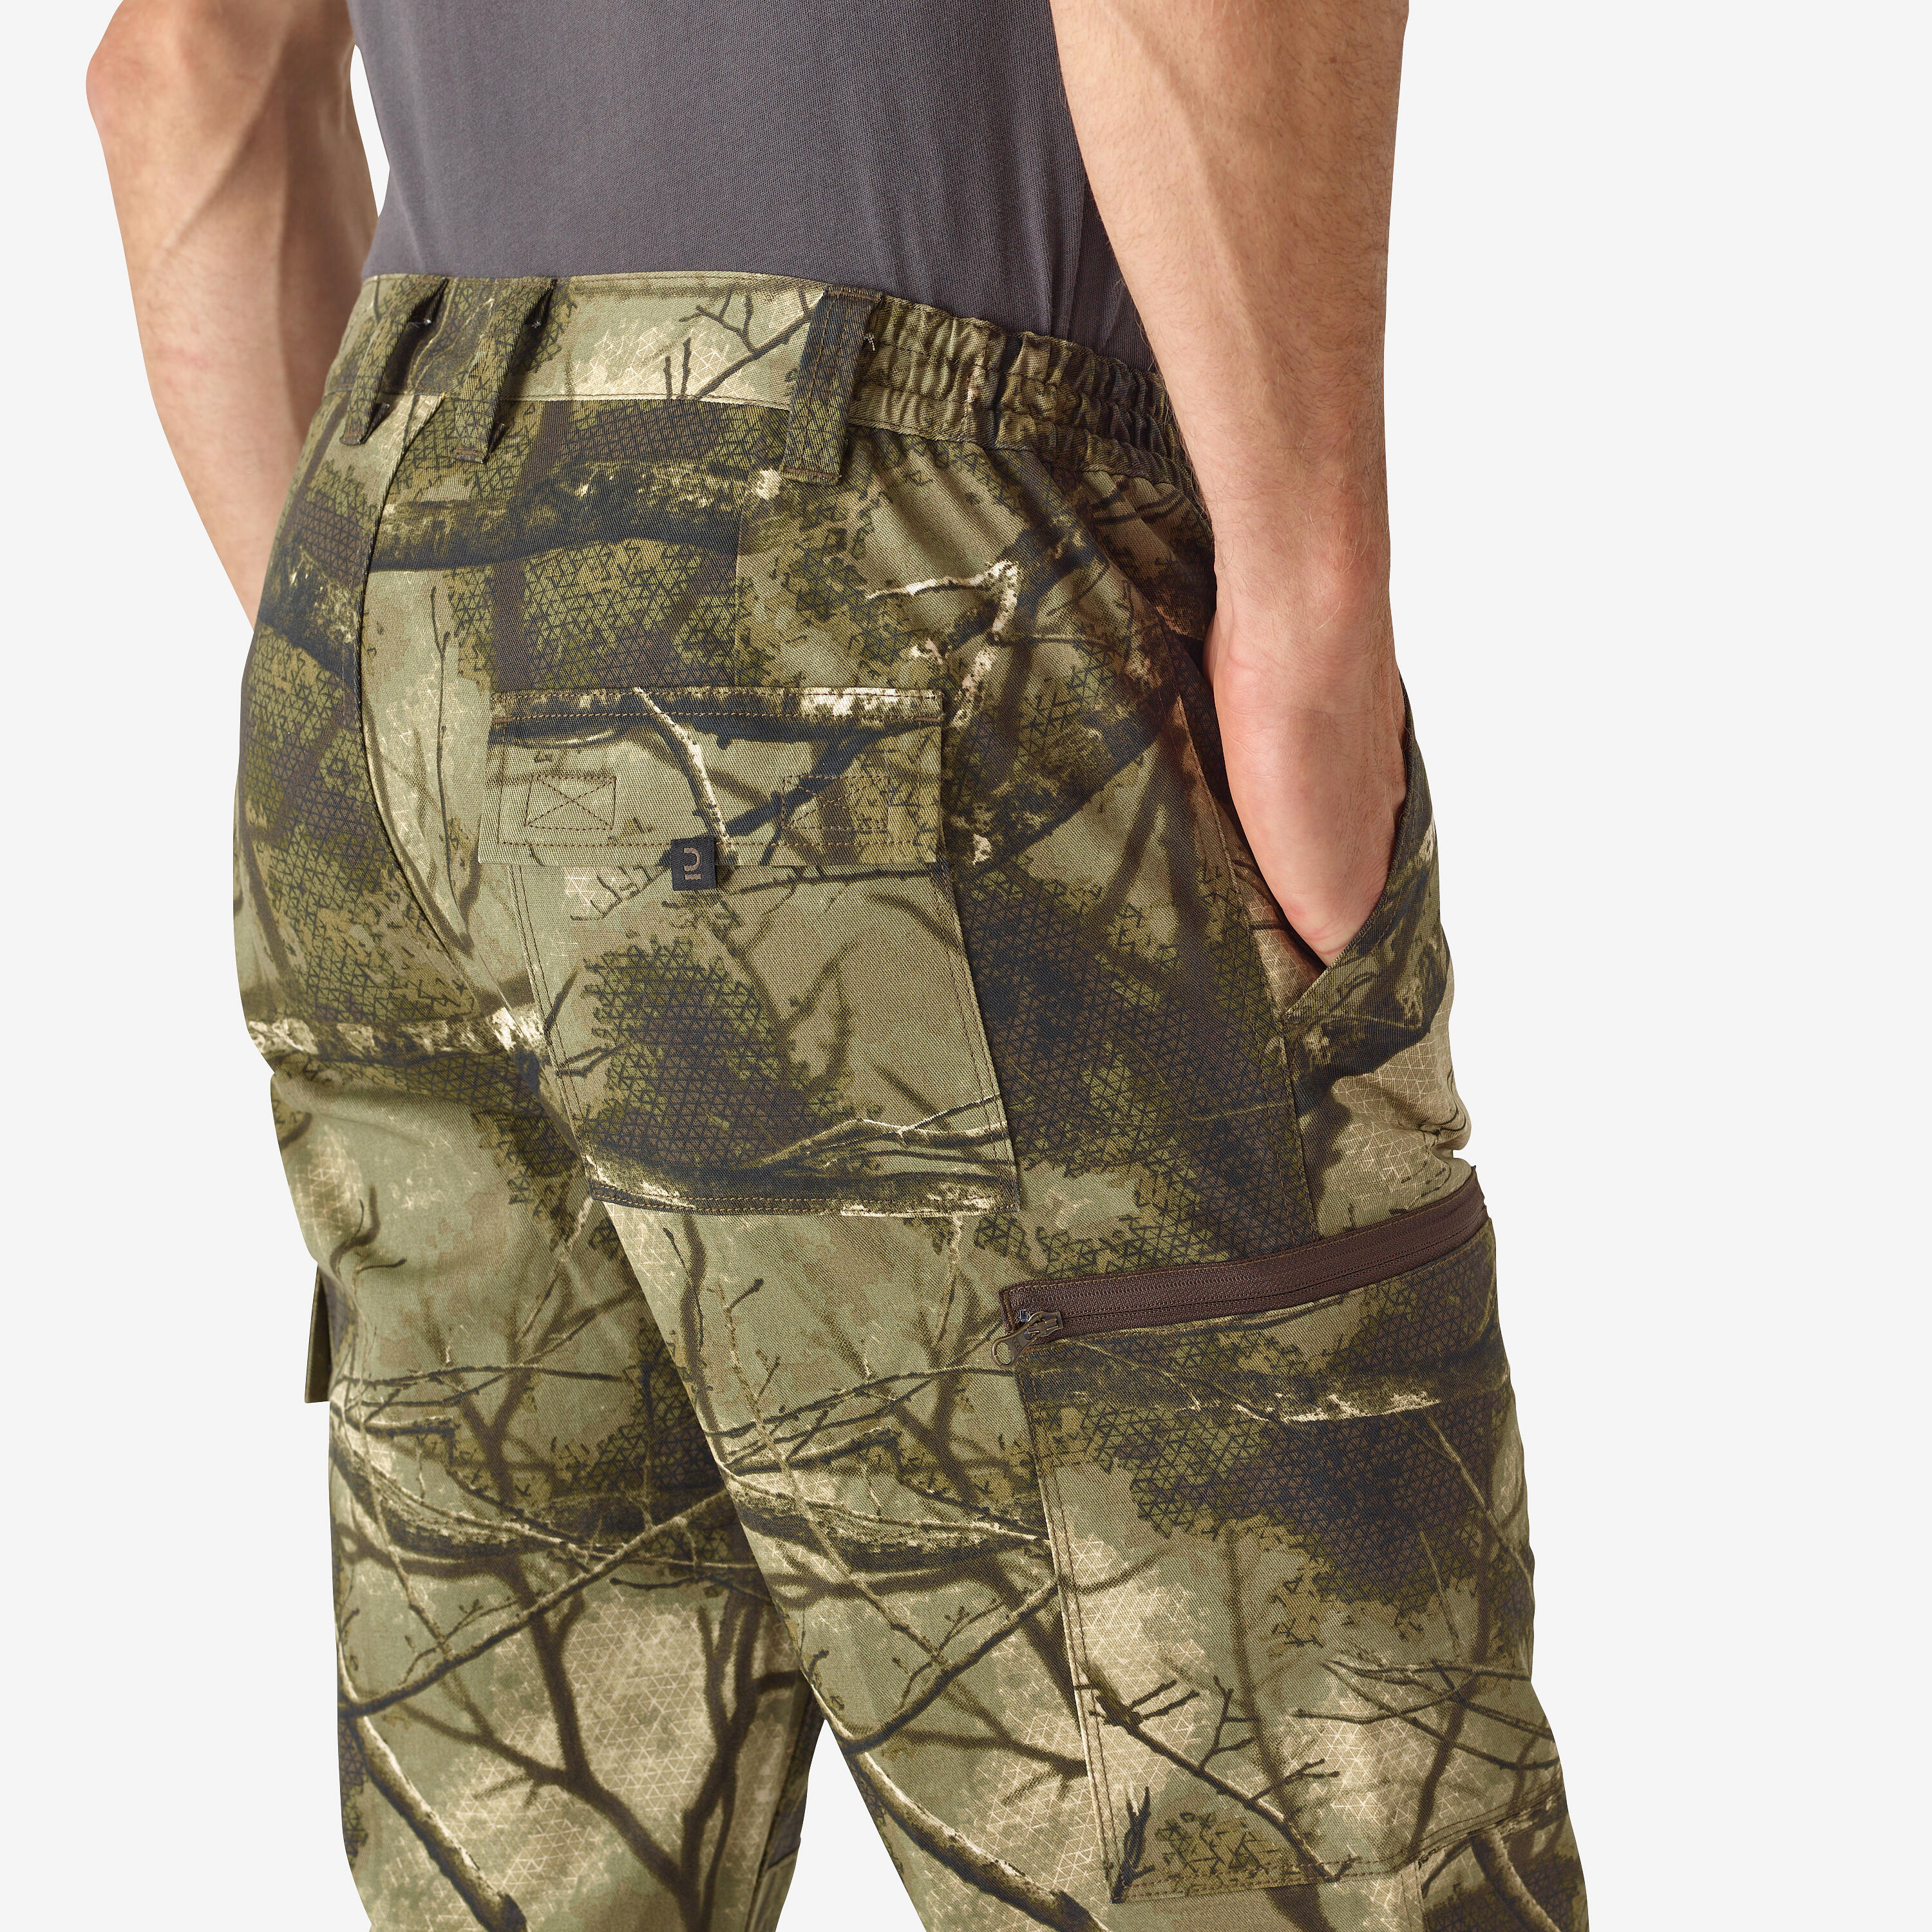 Solognac Hunting Breathable Silent Cotton Trousers 100 Treemetic Camouflage - XL